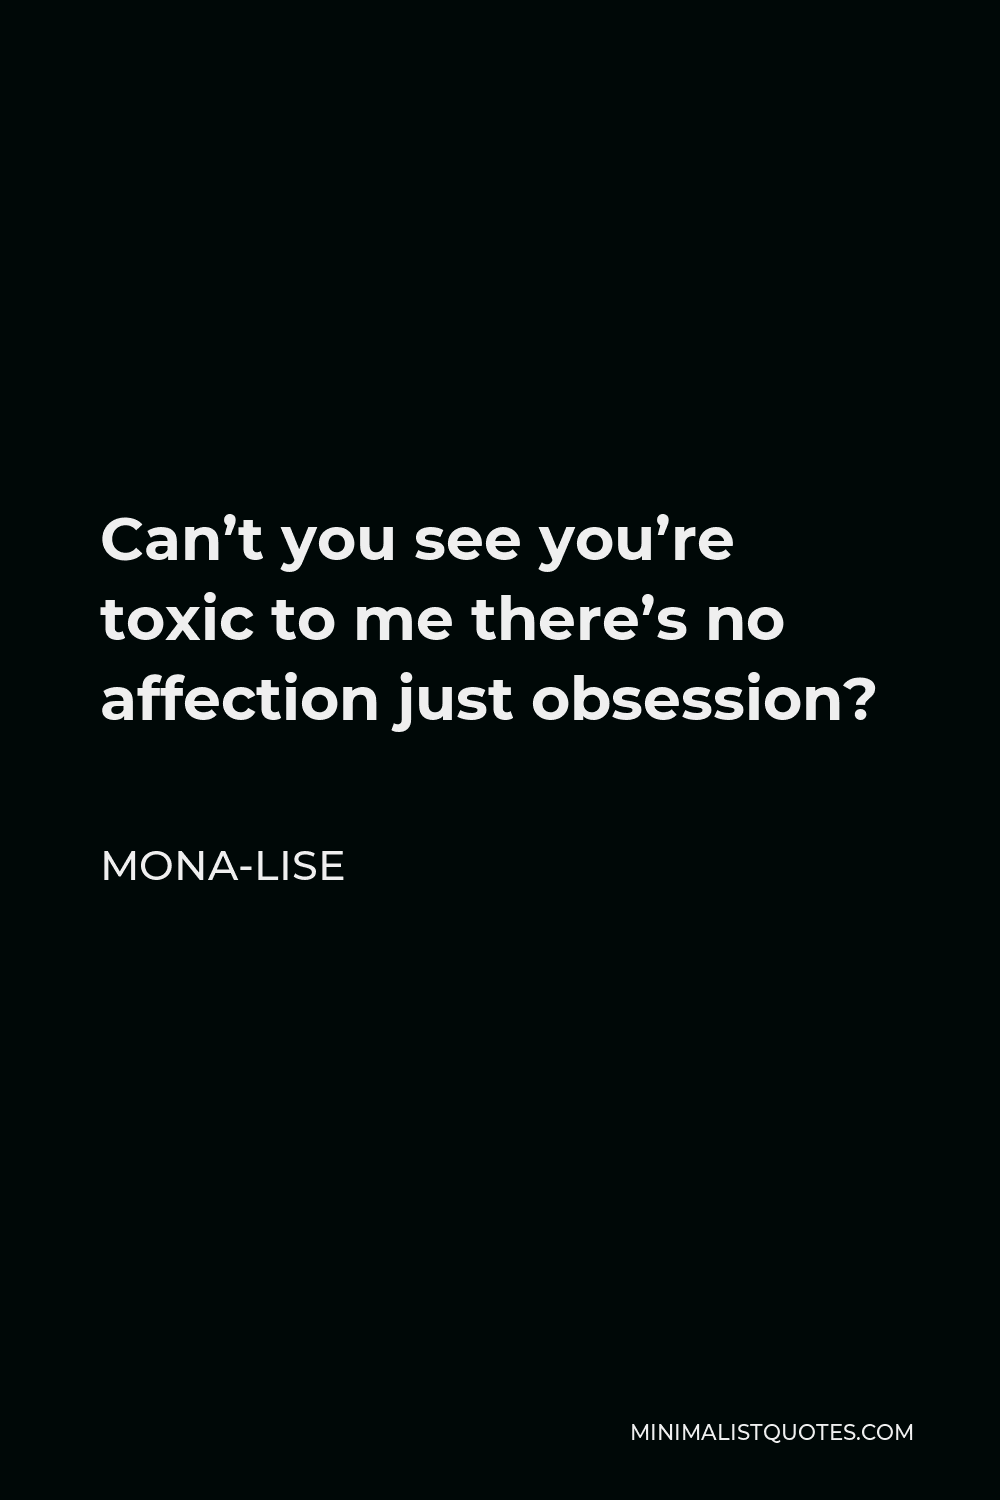 Mona-Lise Quote - Can’t you see you’re toxic to me there’s no affection just obsession?